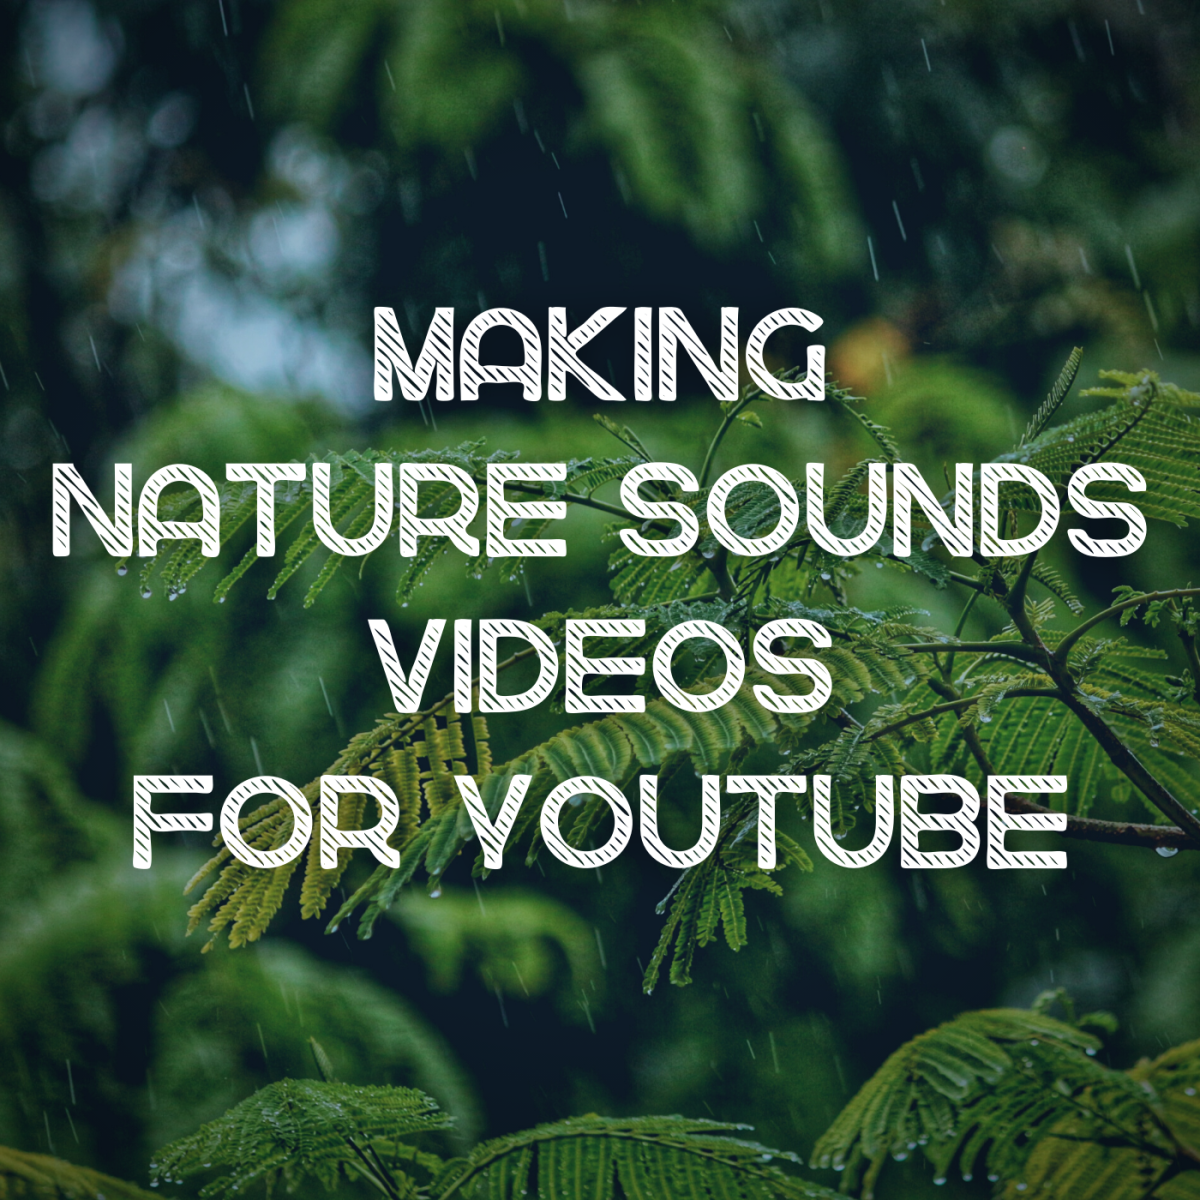 Many viewers on YouTube seek out videos with soothing, relaxing nature sounds. These videos are surprisingly easy to make.